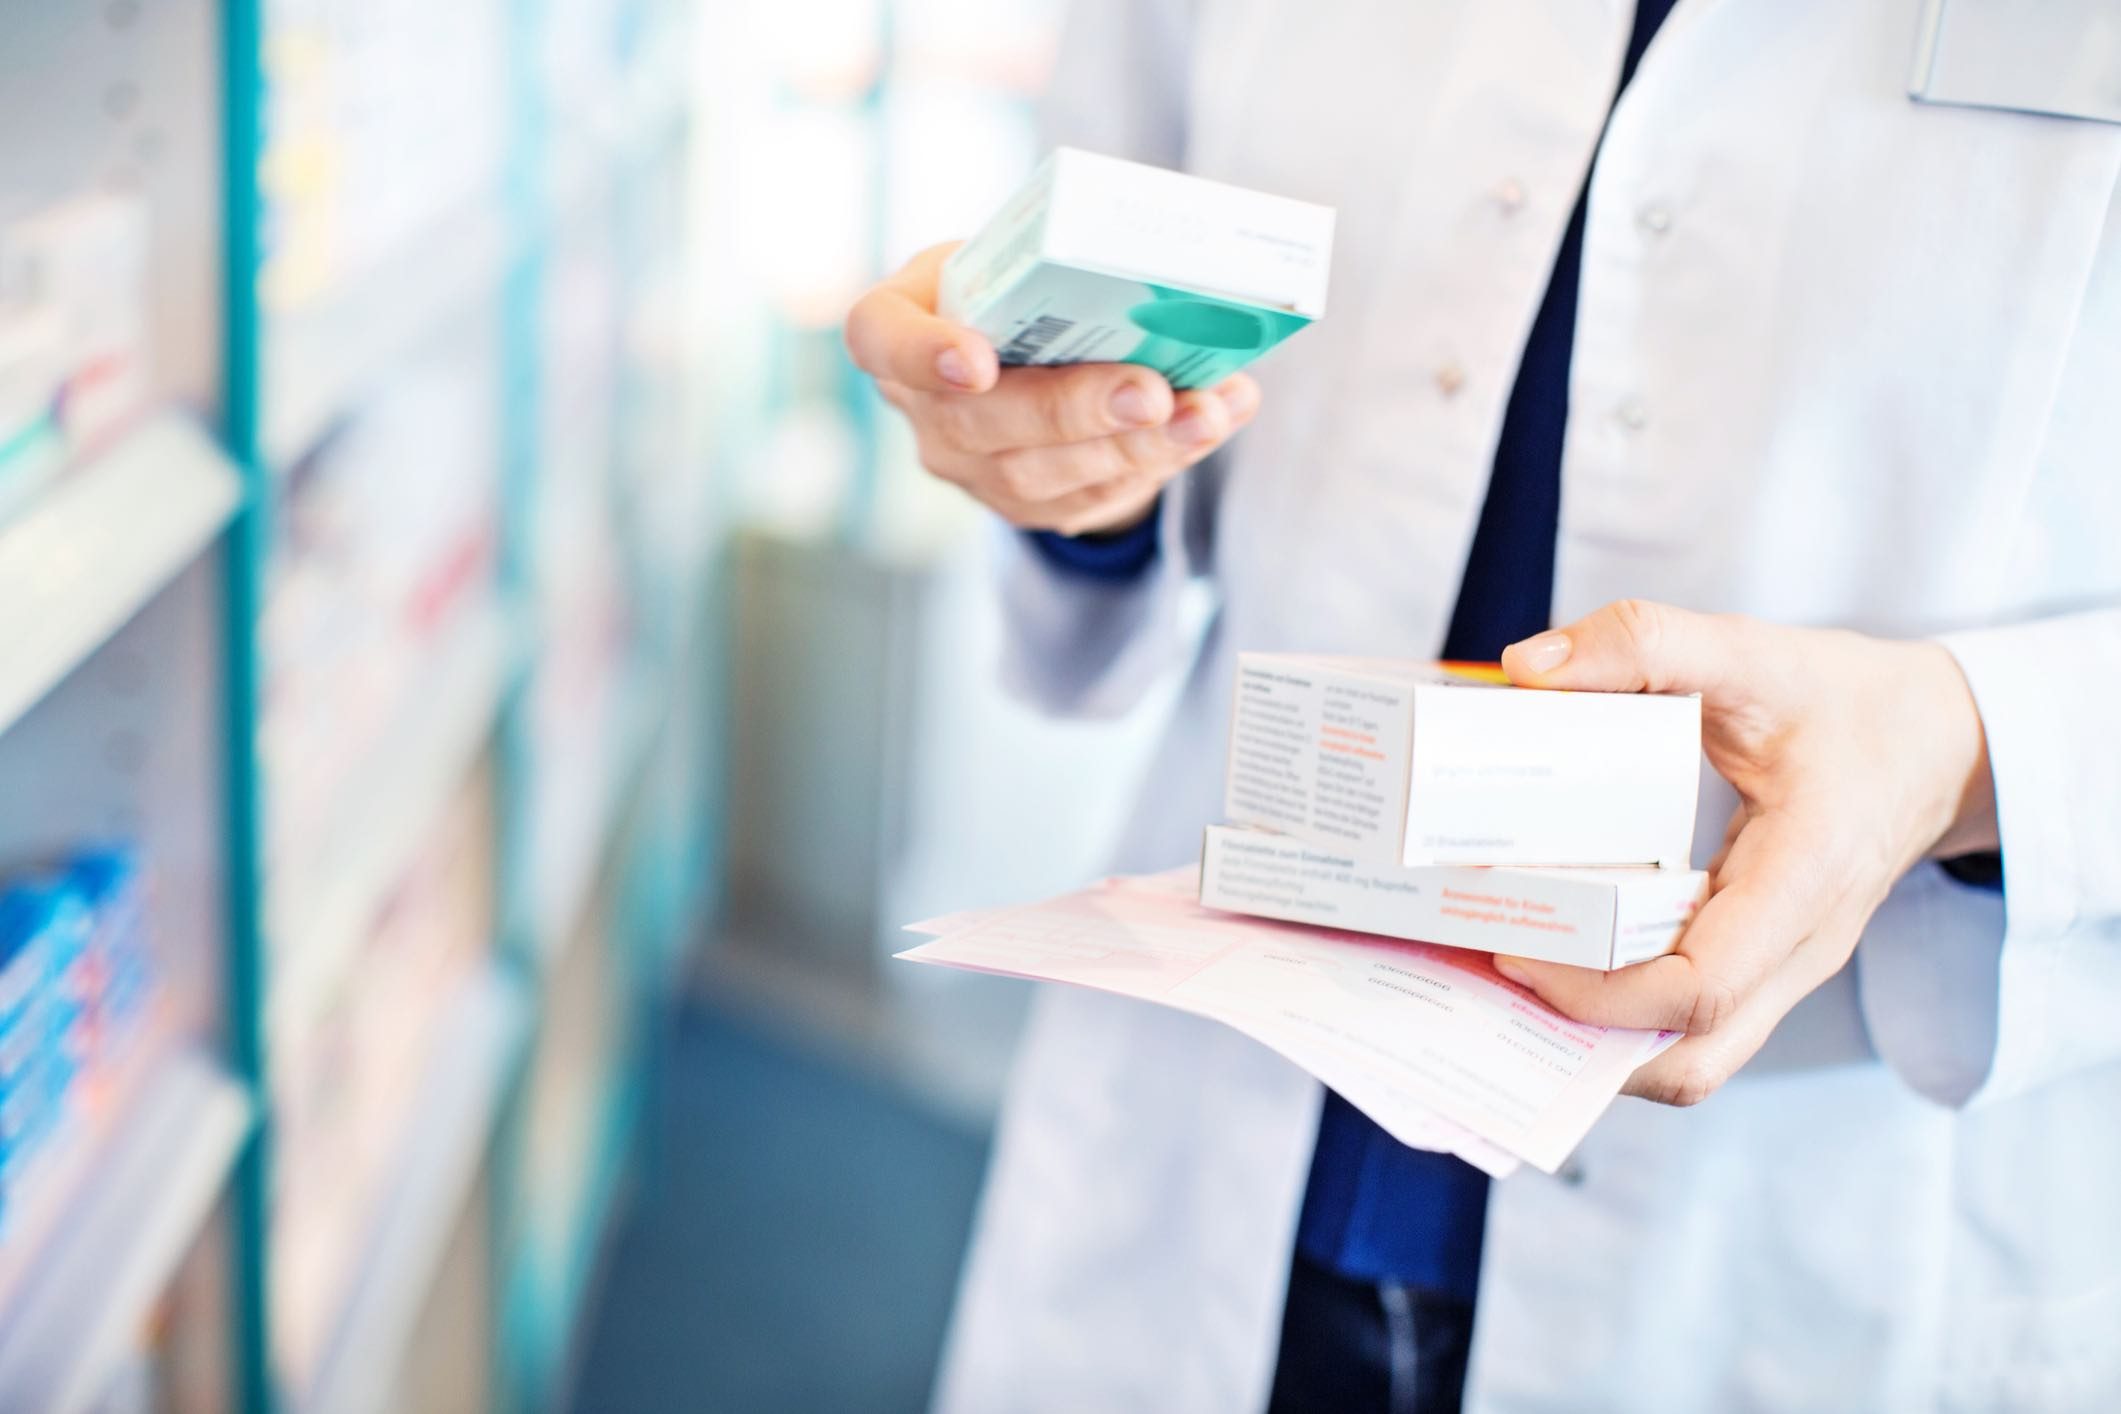 A pharmacist is holding a box of medicine in a pharmacy.